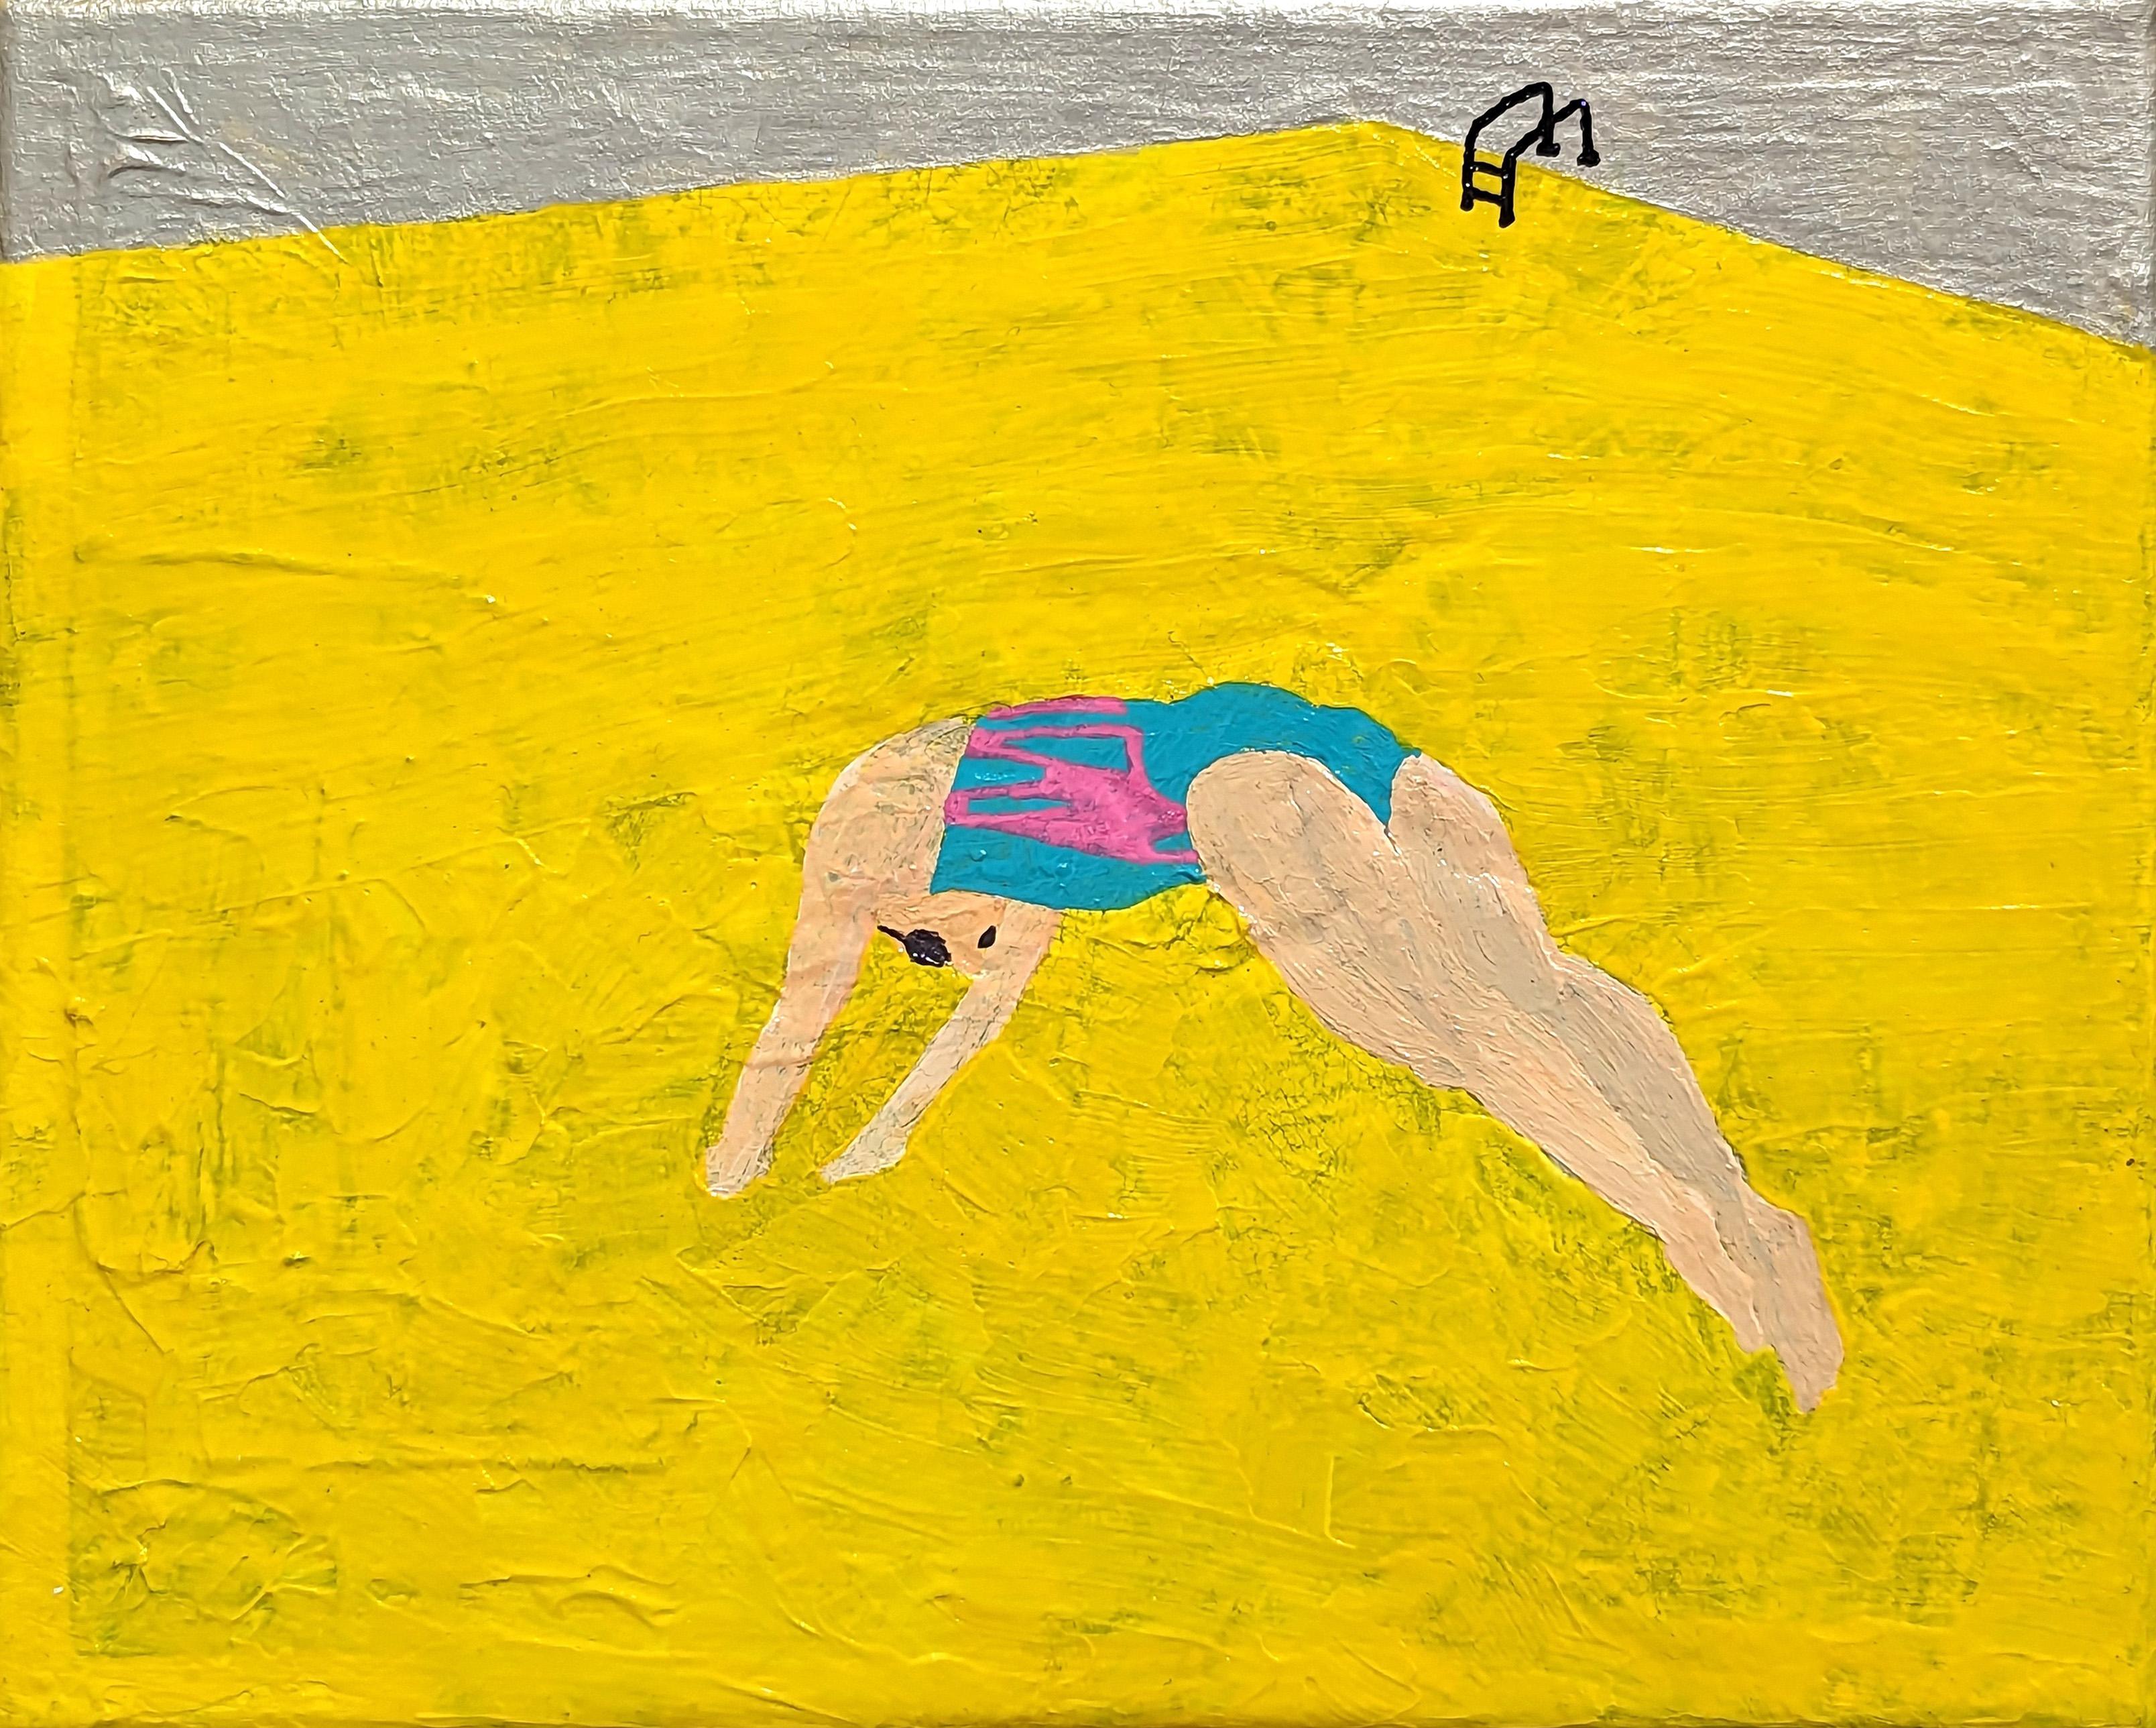 Alex Paulus Figurative Painting - “Diving into a pool of hot piss” Colorful Contemporary Dark Humor Painting